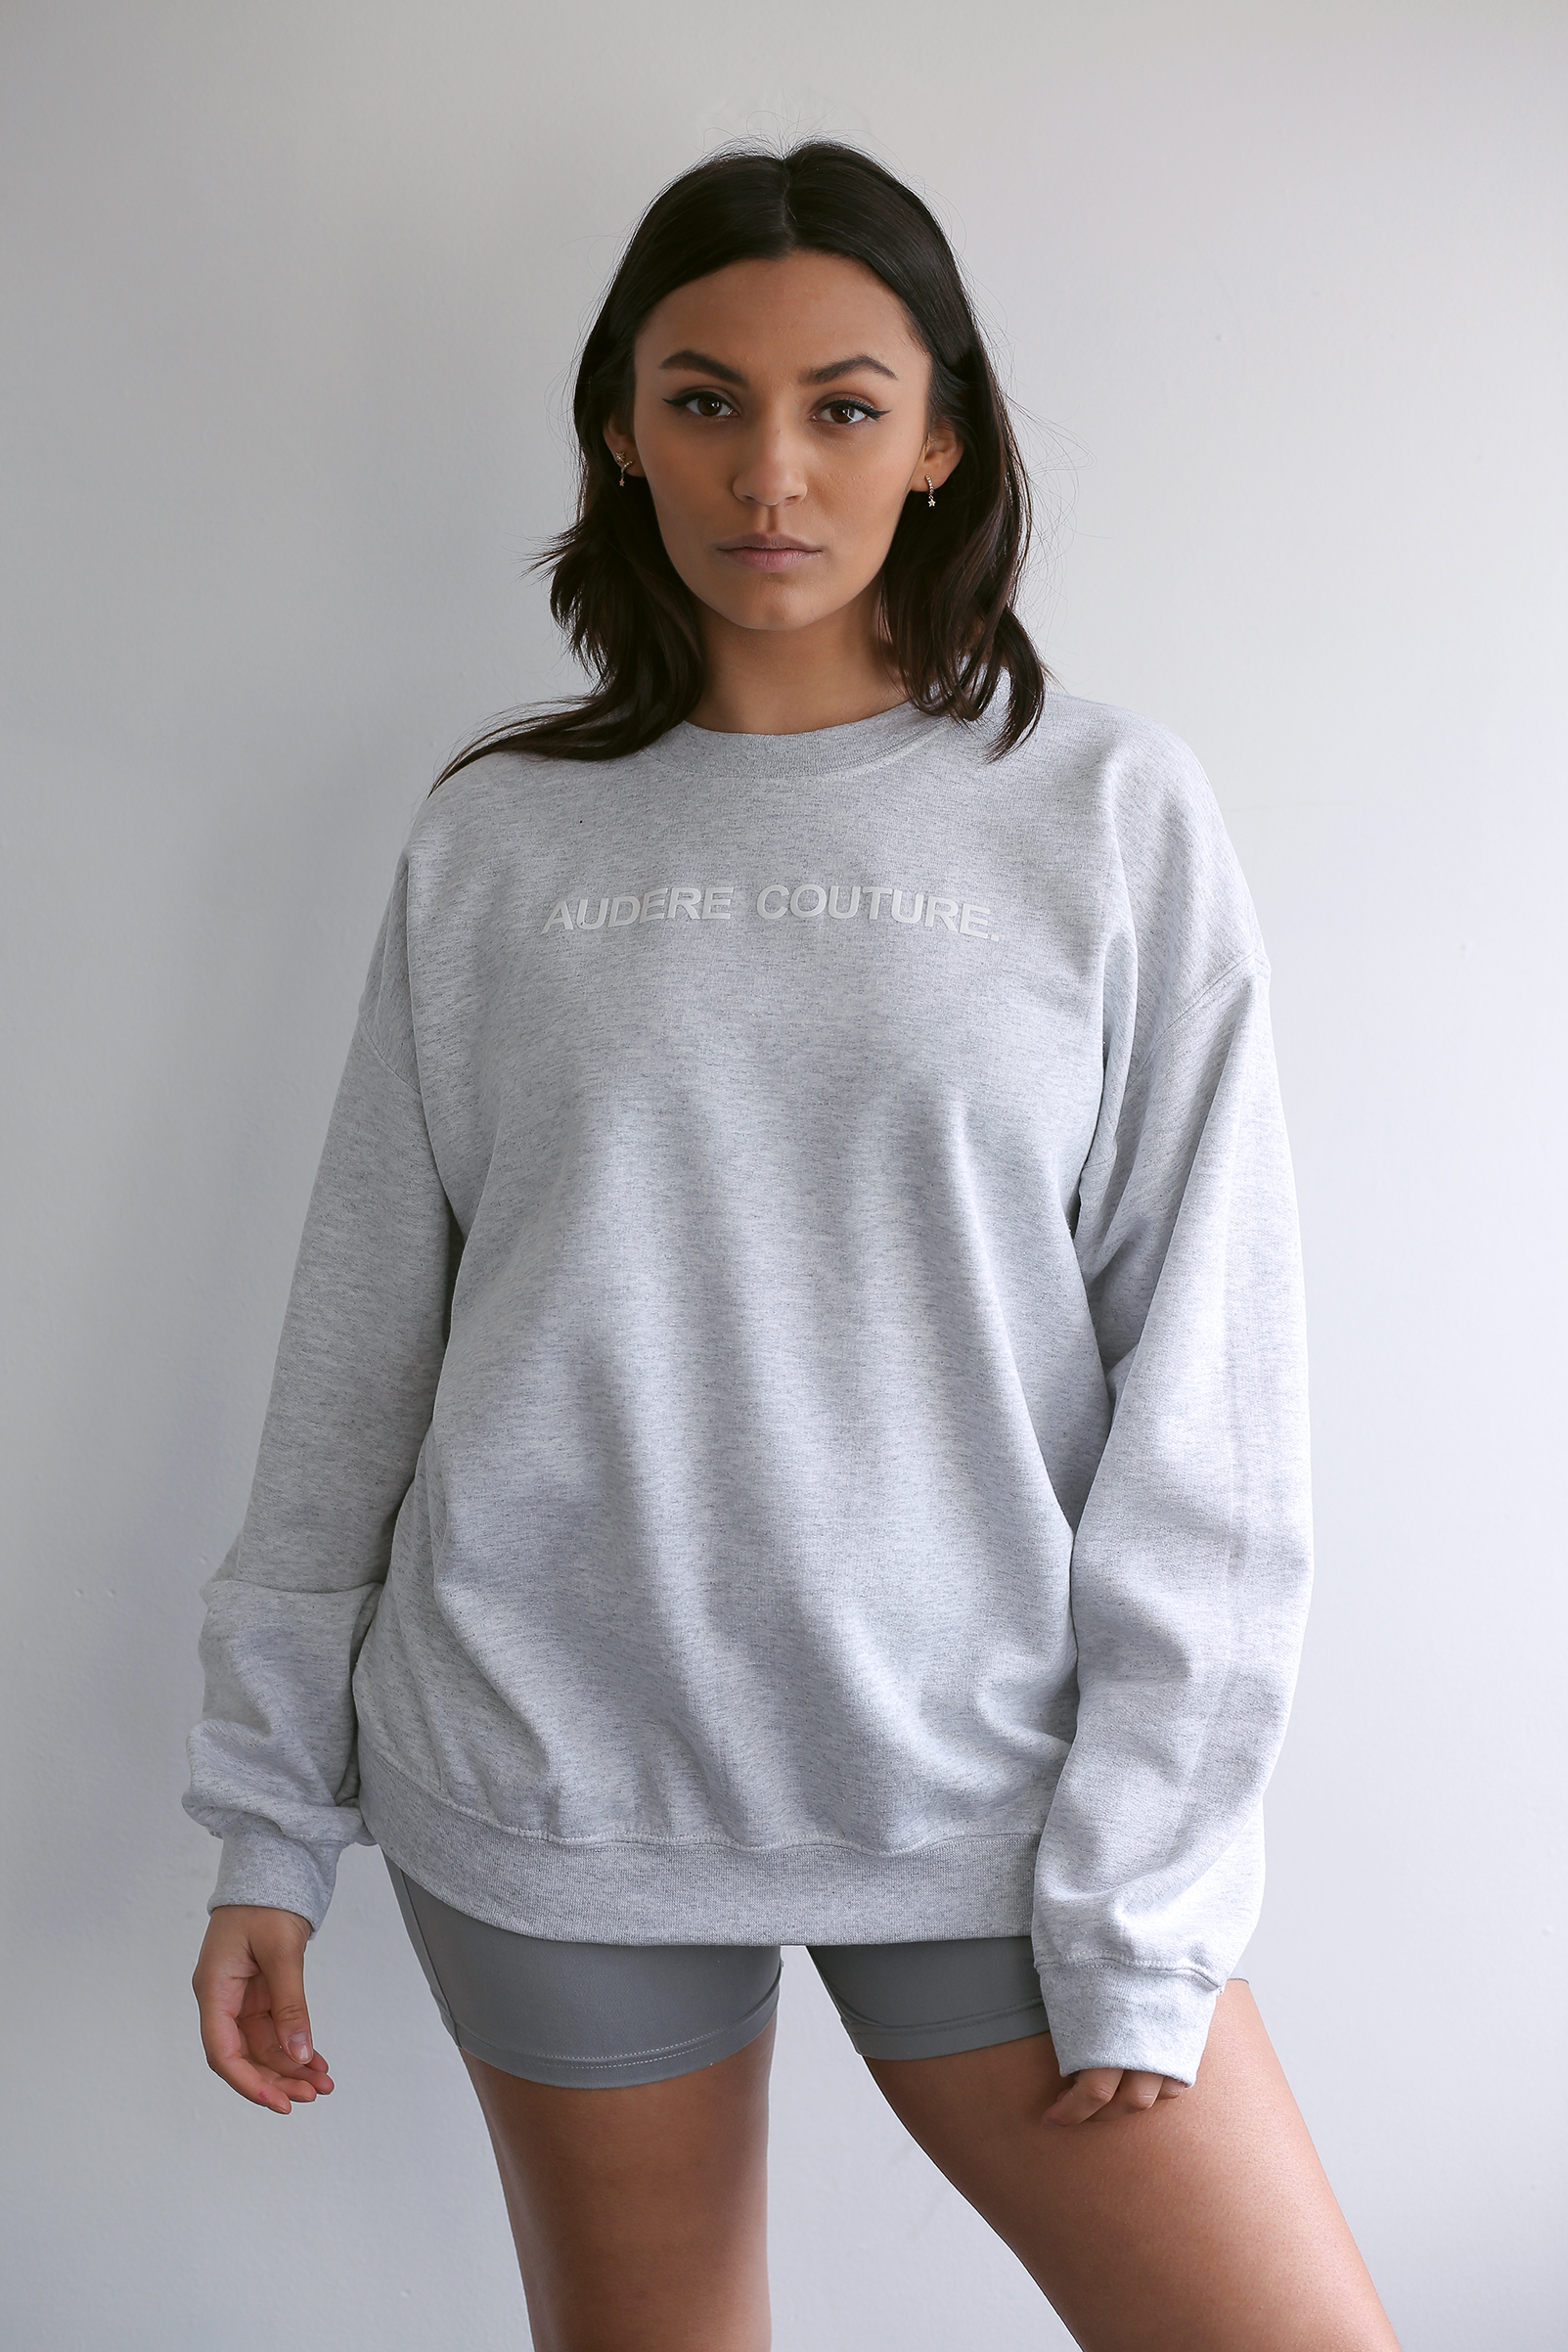 Grey/White Large Logo Sweater – Audere Couture